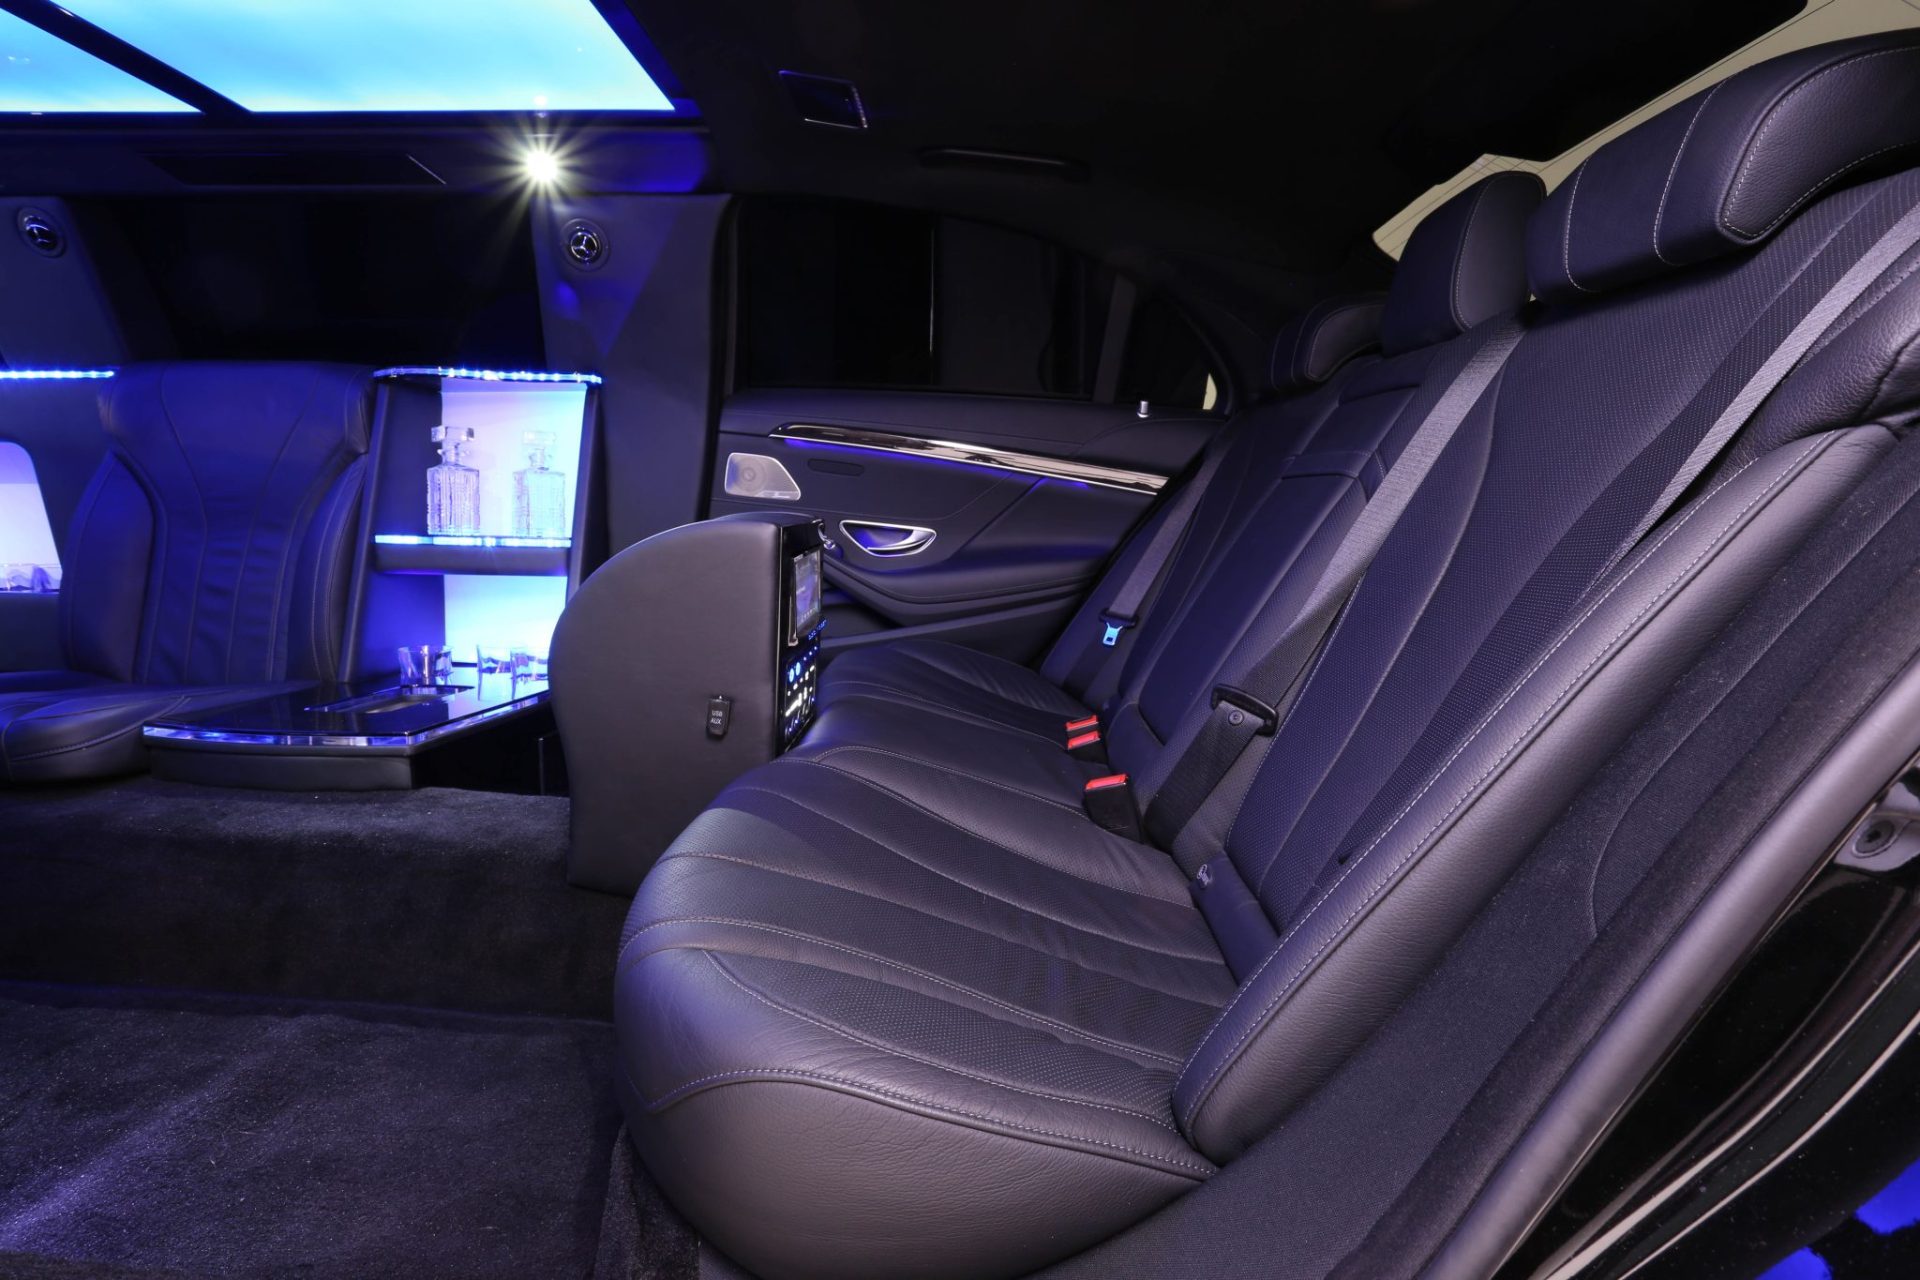 Mercedes Benz S-Class Stretched Limousine - Interior Photo #23